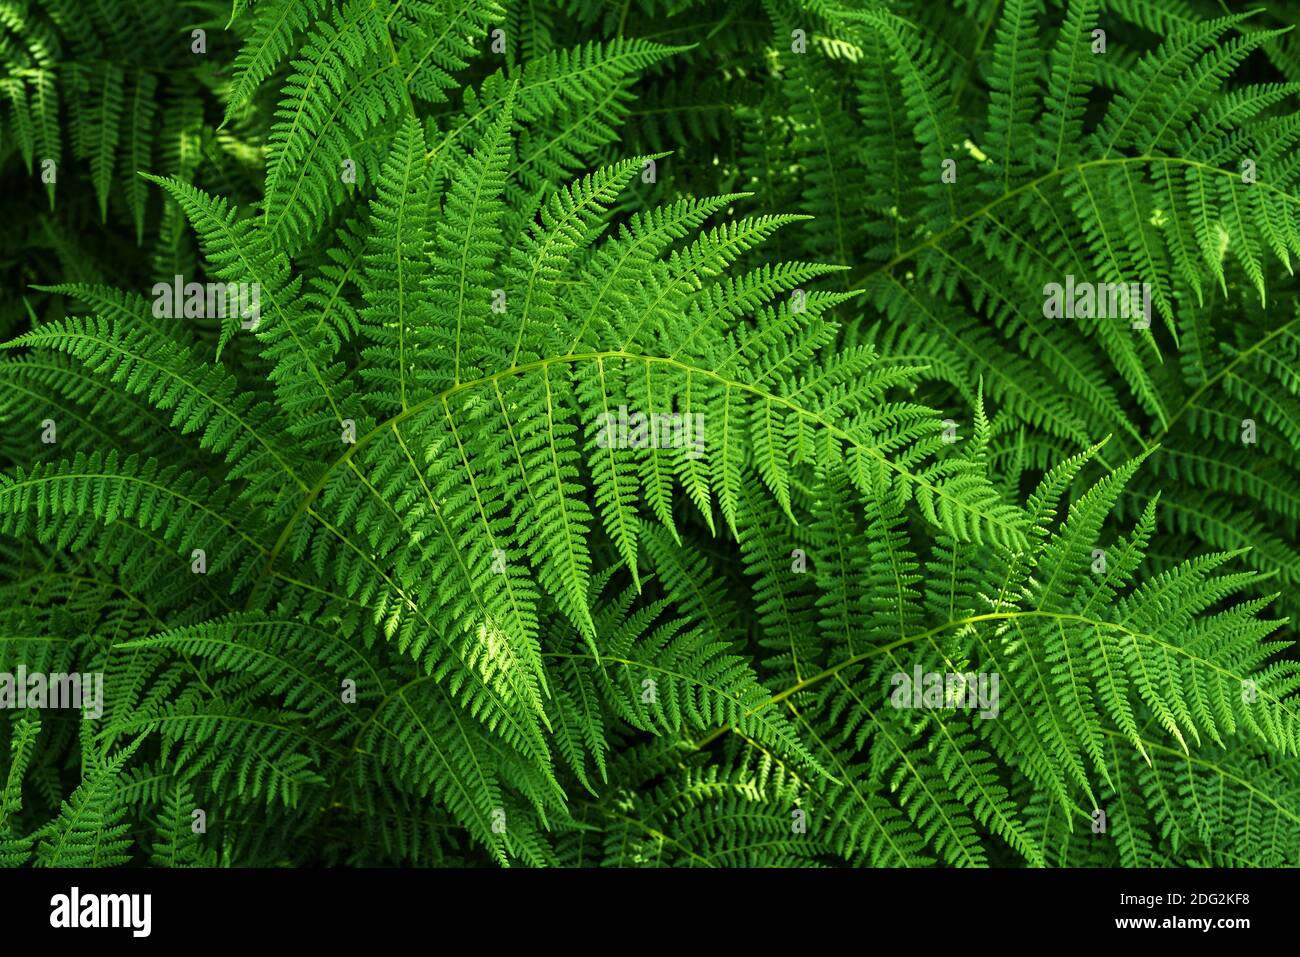 Beautyful green ferns leaves ,  natural floral fern background Stock Photo